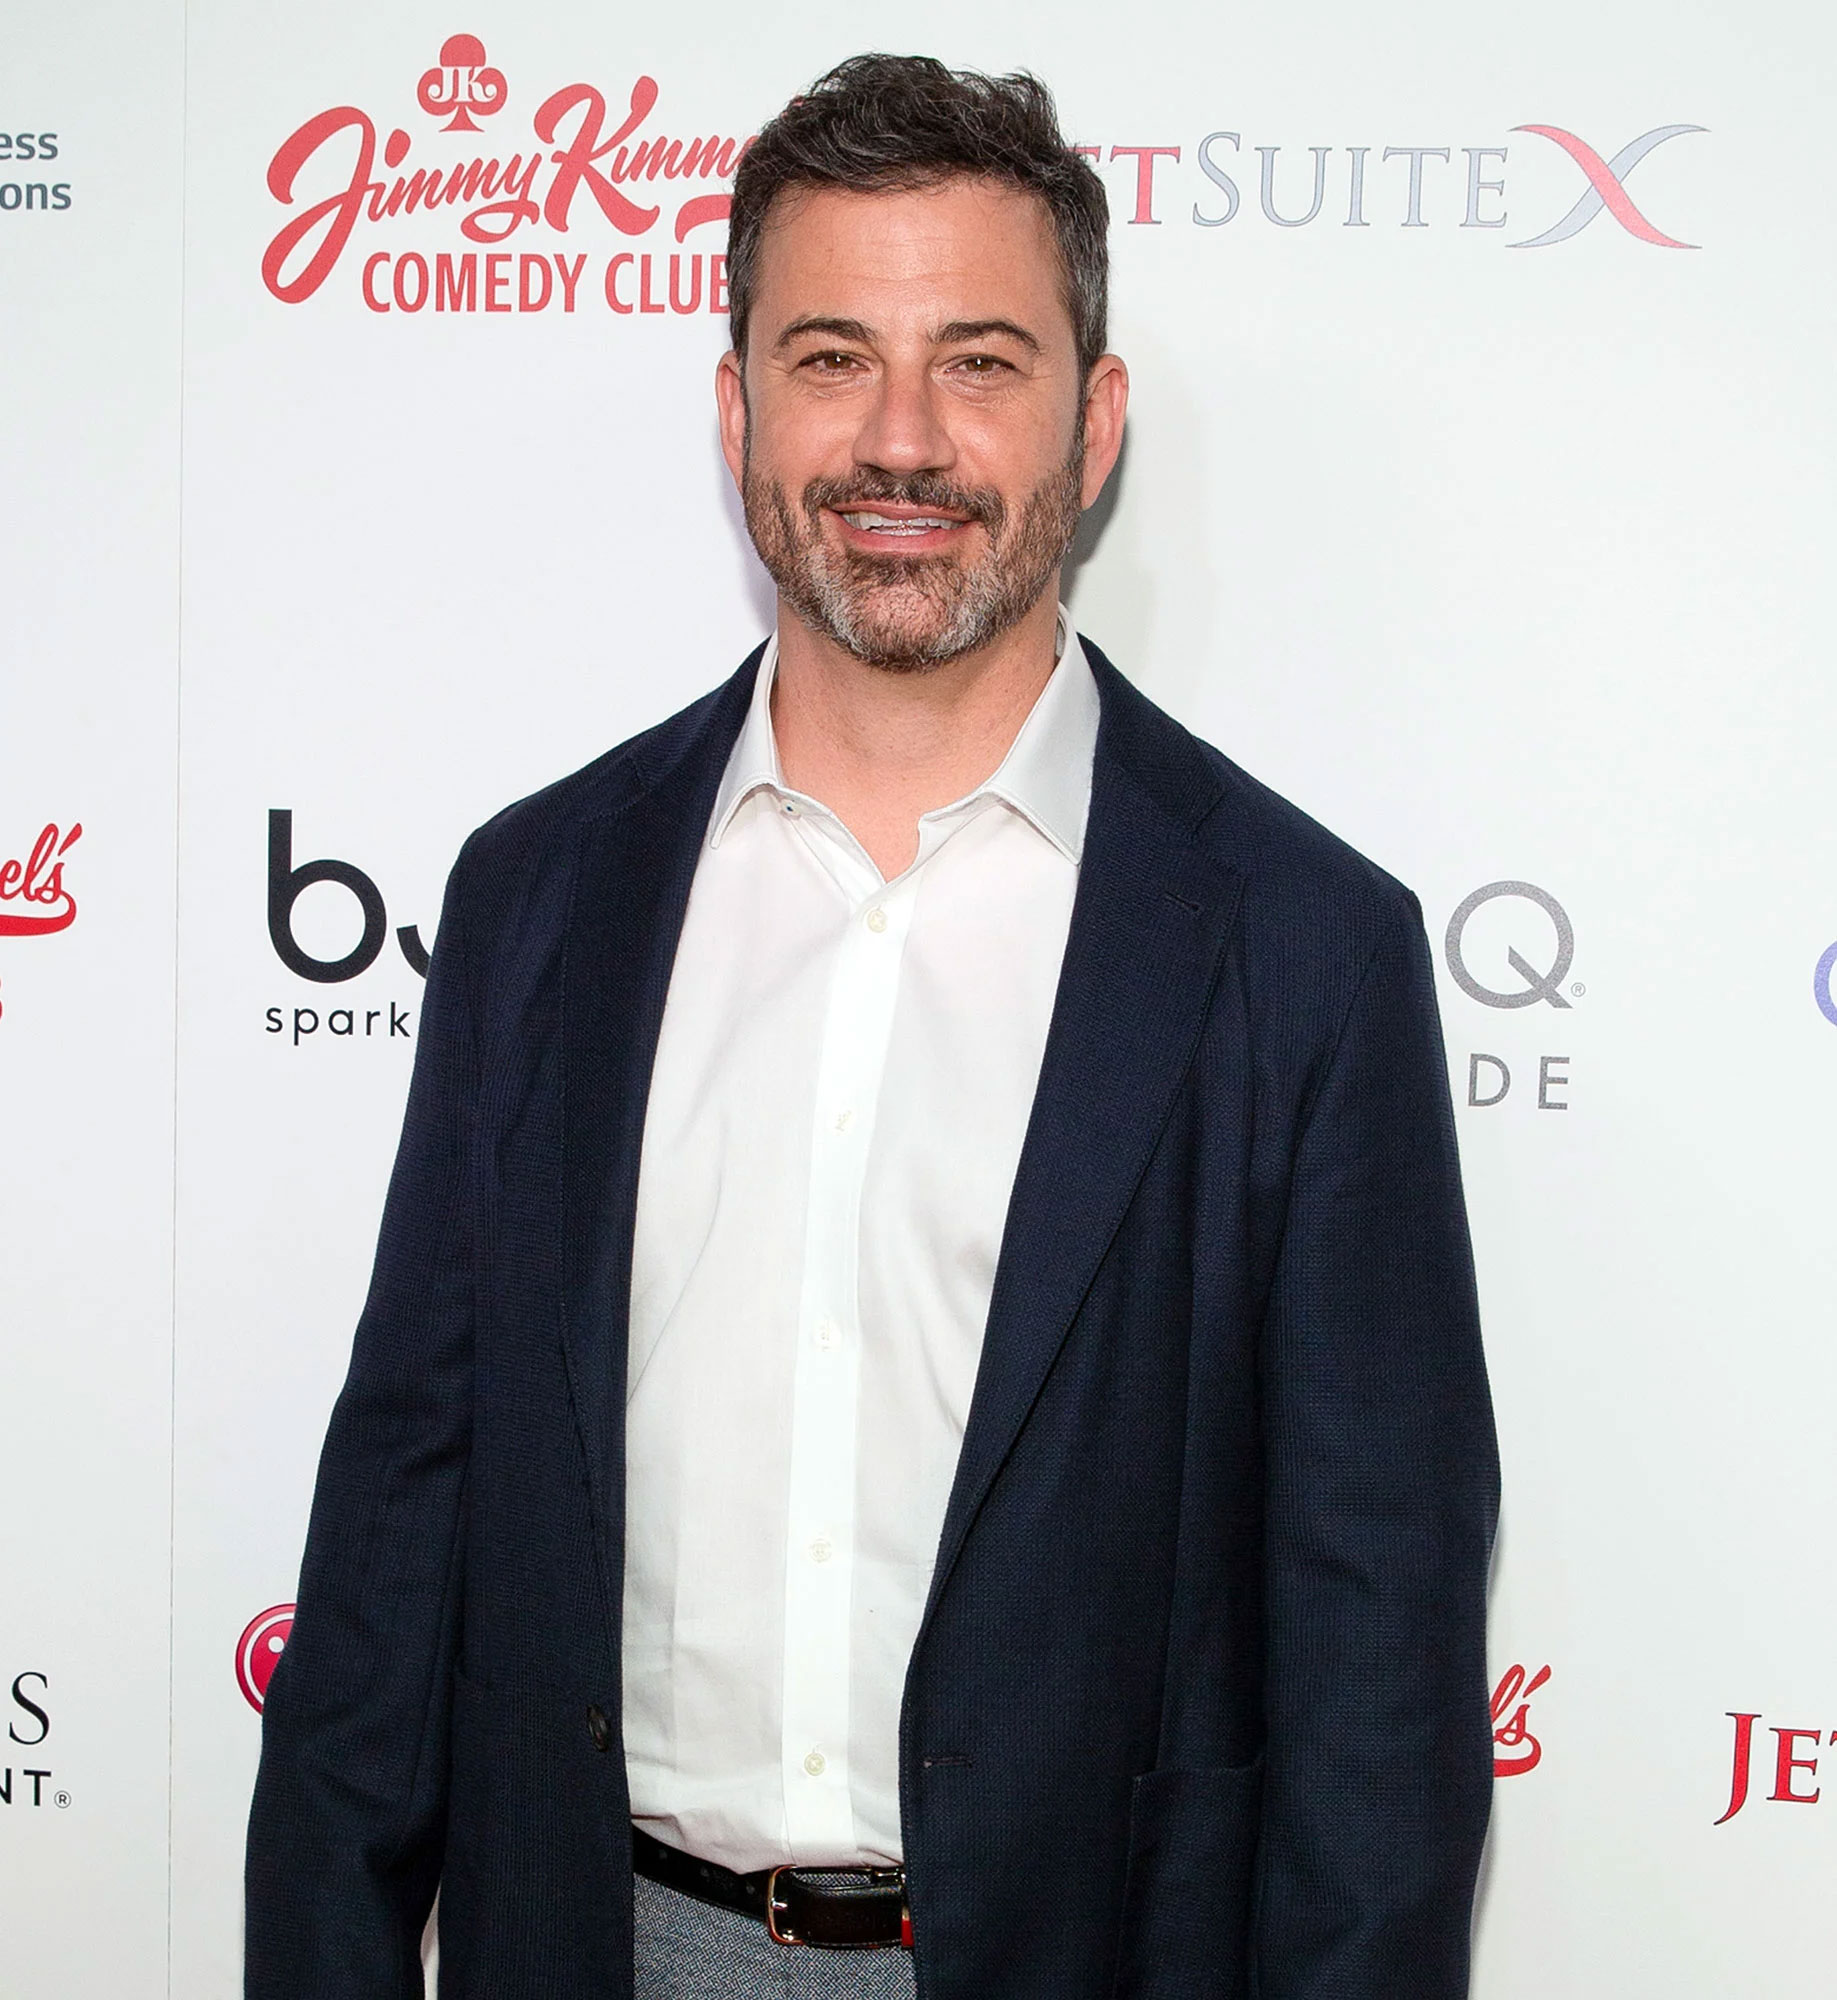 Will Jimmy Kimmel Leave Late-Night Show Jimmy Kimmel Live!? picture